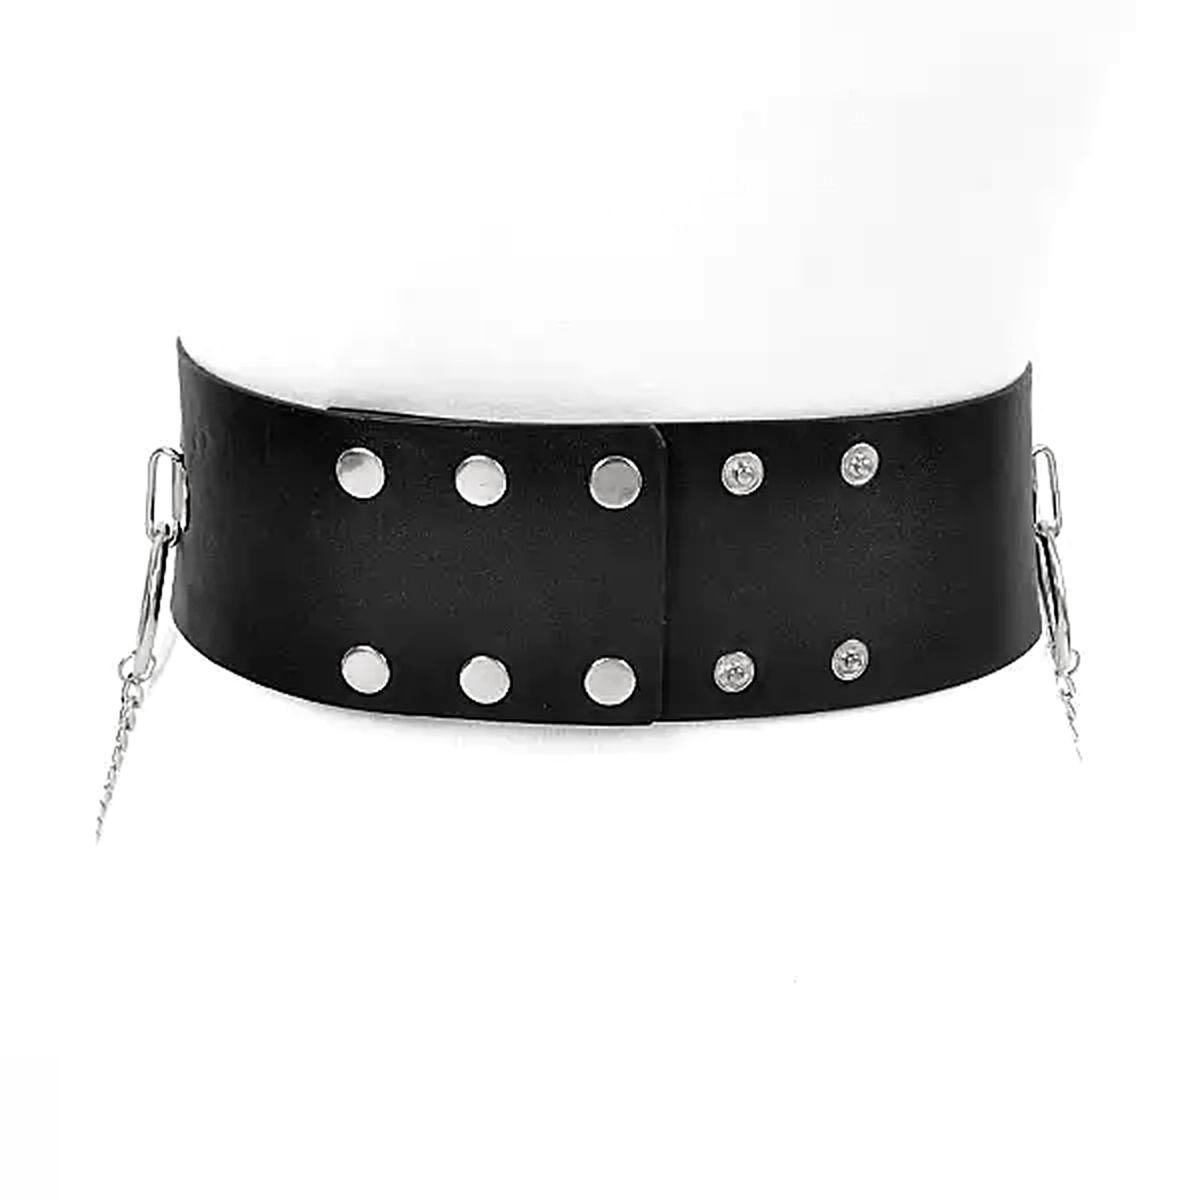 RINGS AND CHAINS WIDE VEGAN BELT